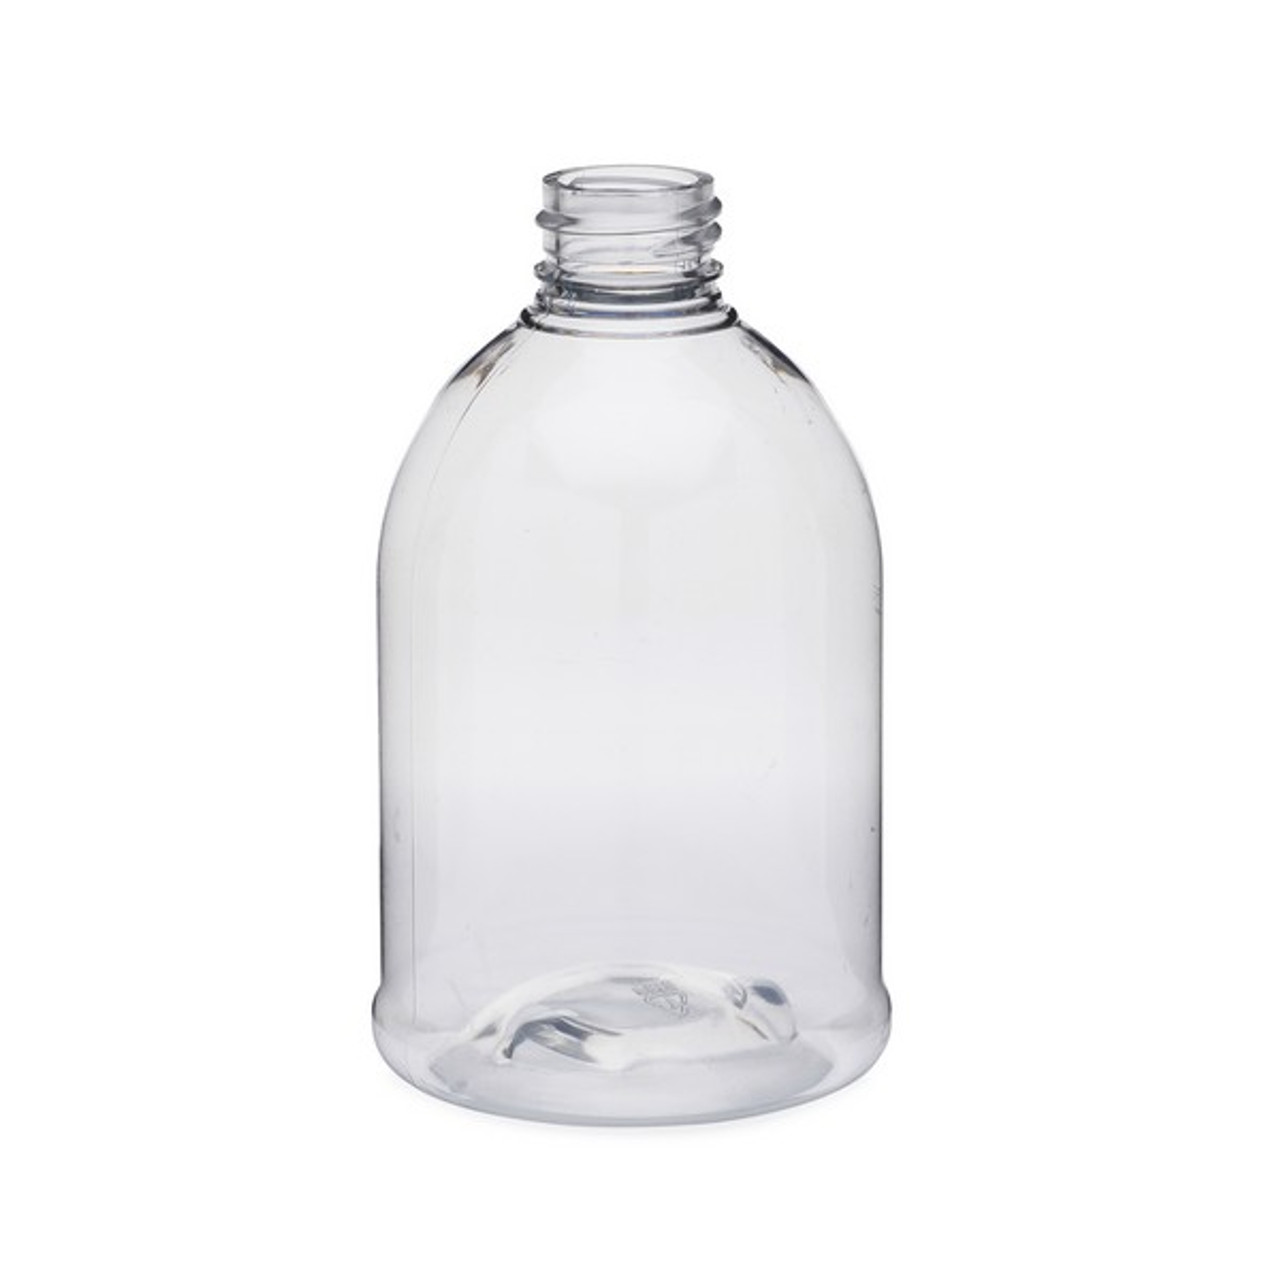 Wholesale Glass and Plastic Bottles and Packaging